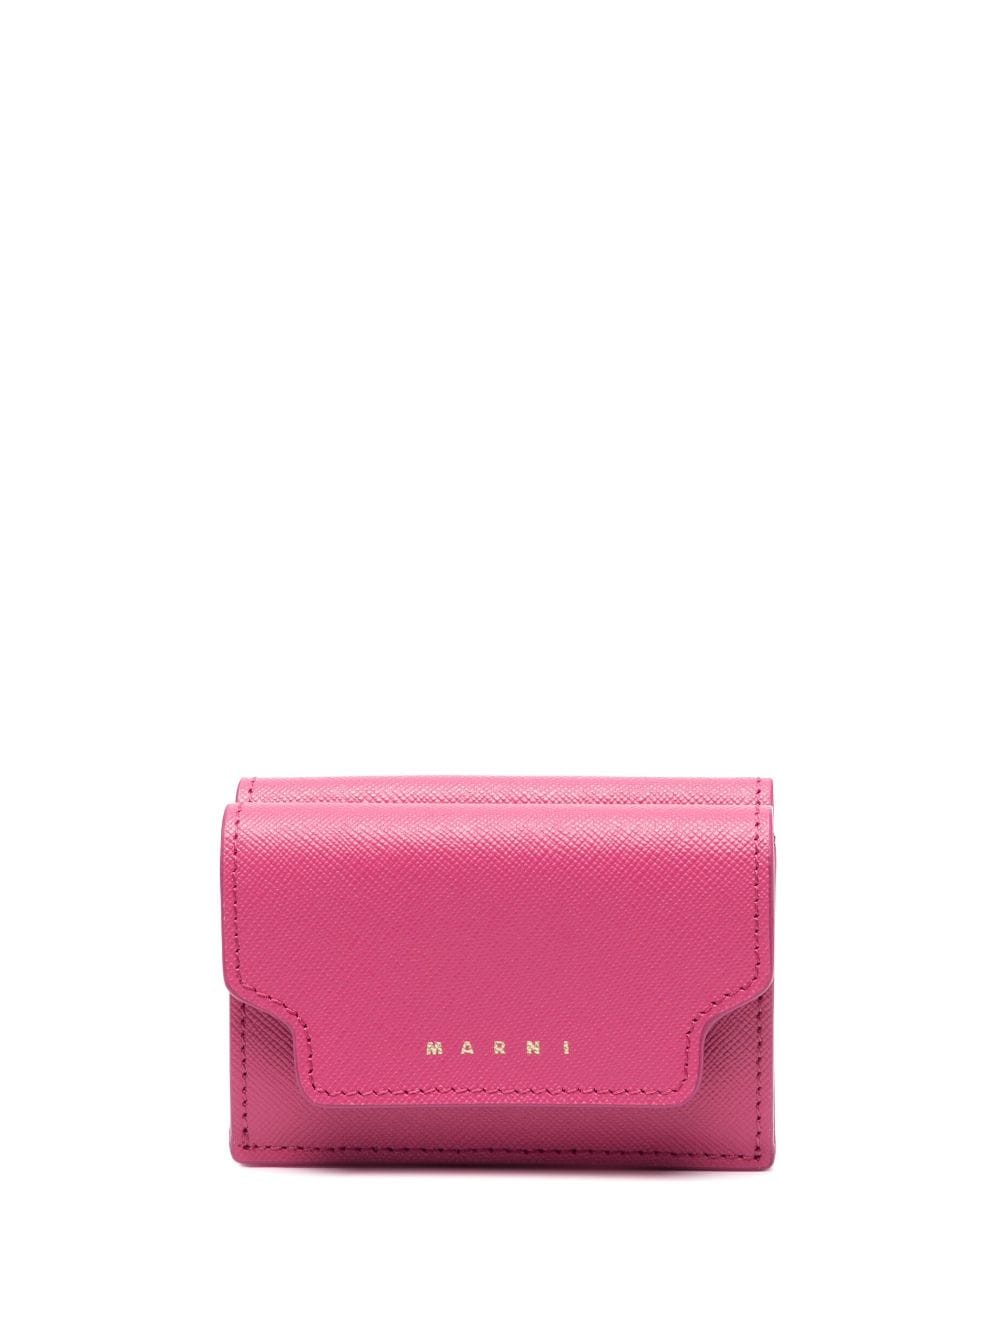 Marni Tri-fold Leather Wallet In Pink